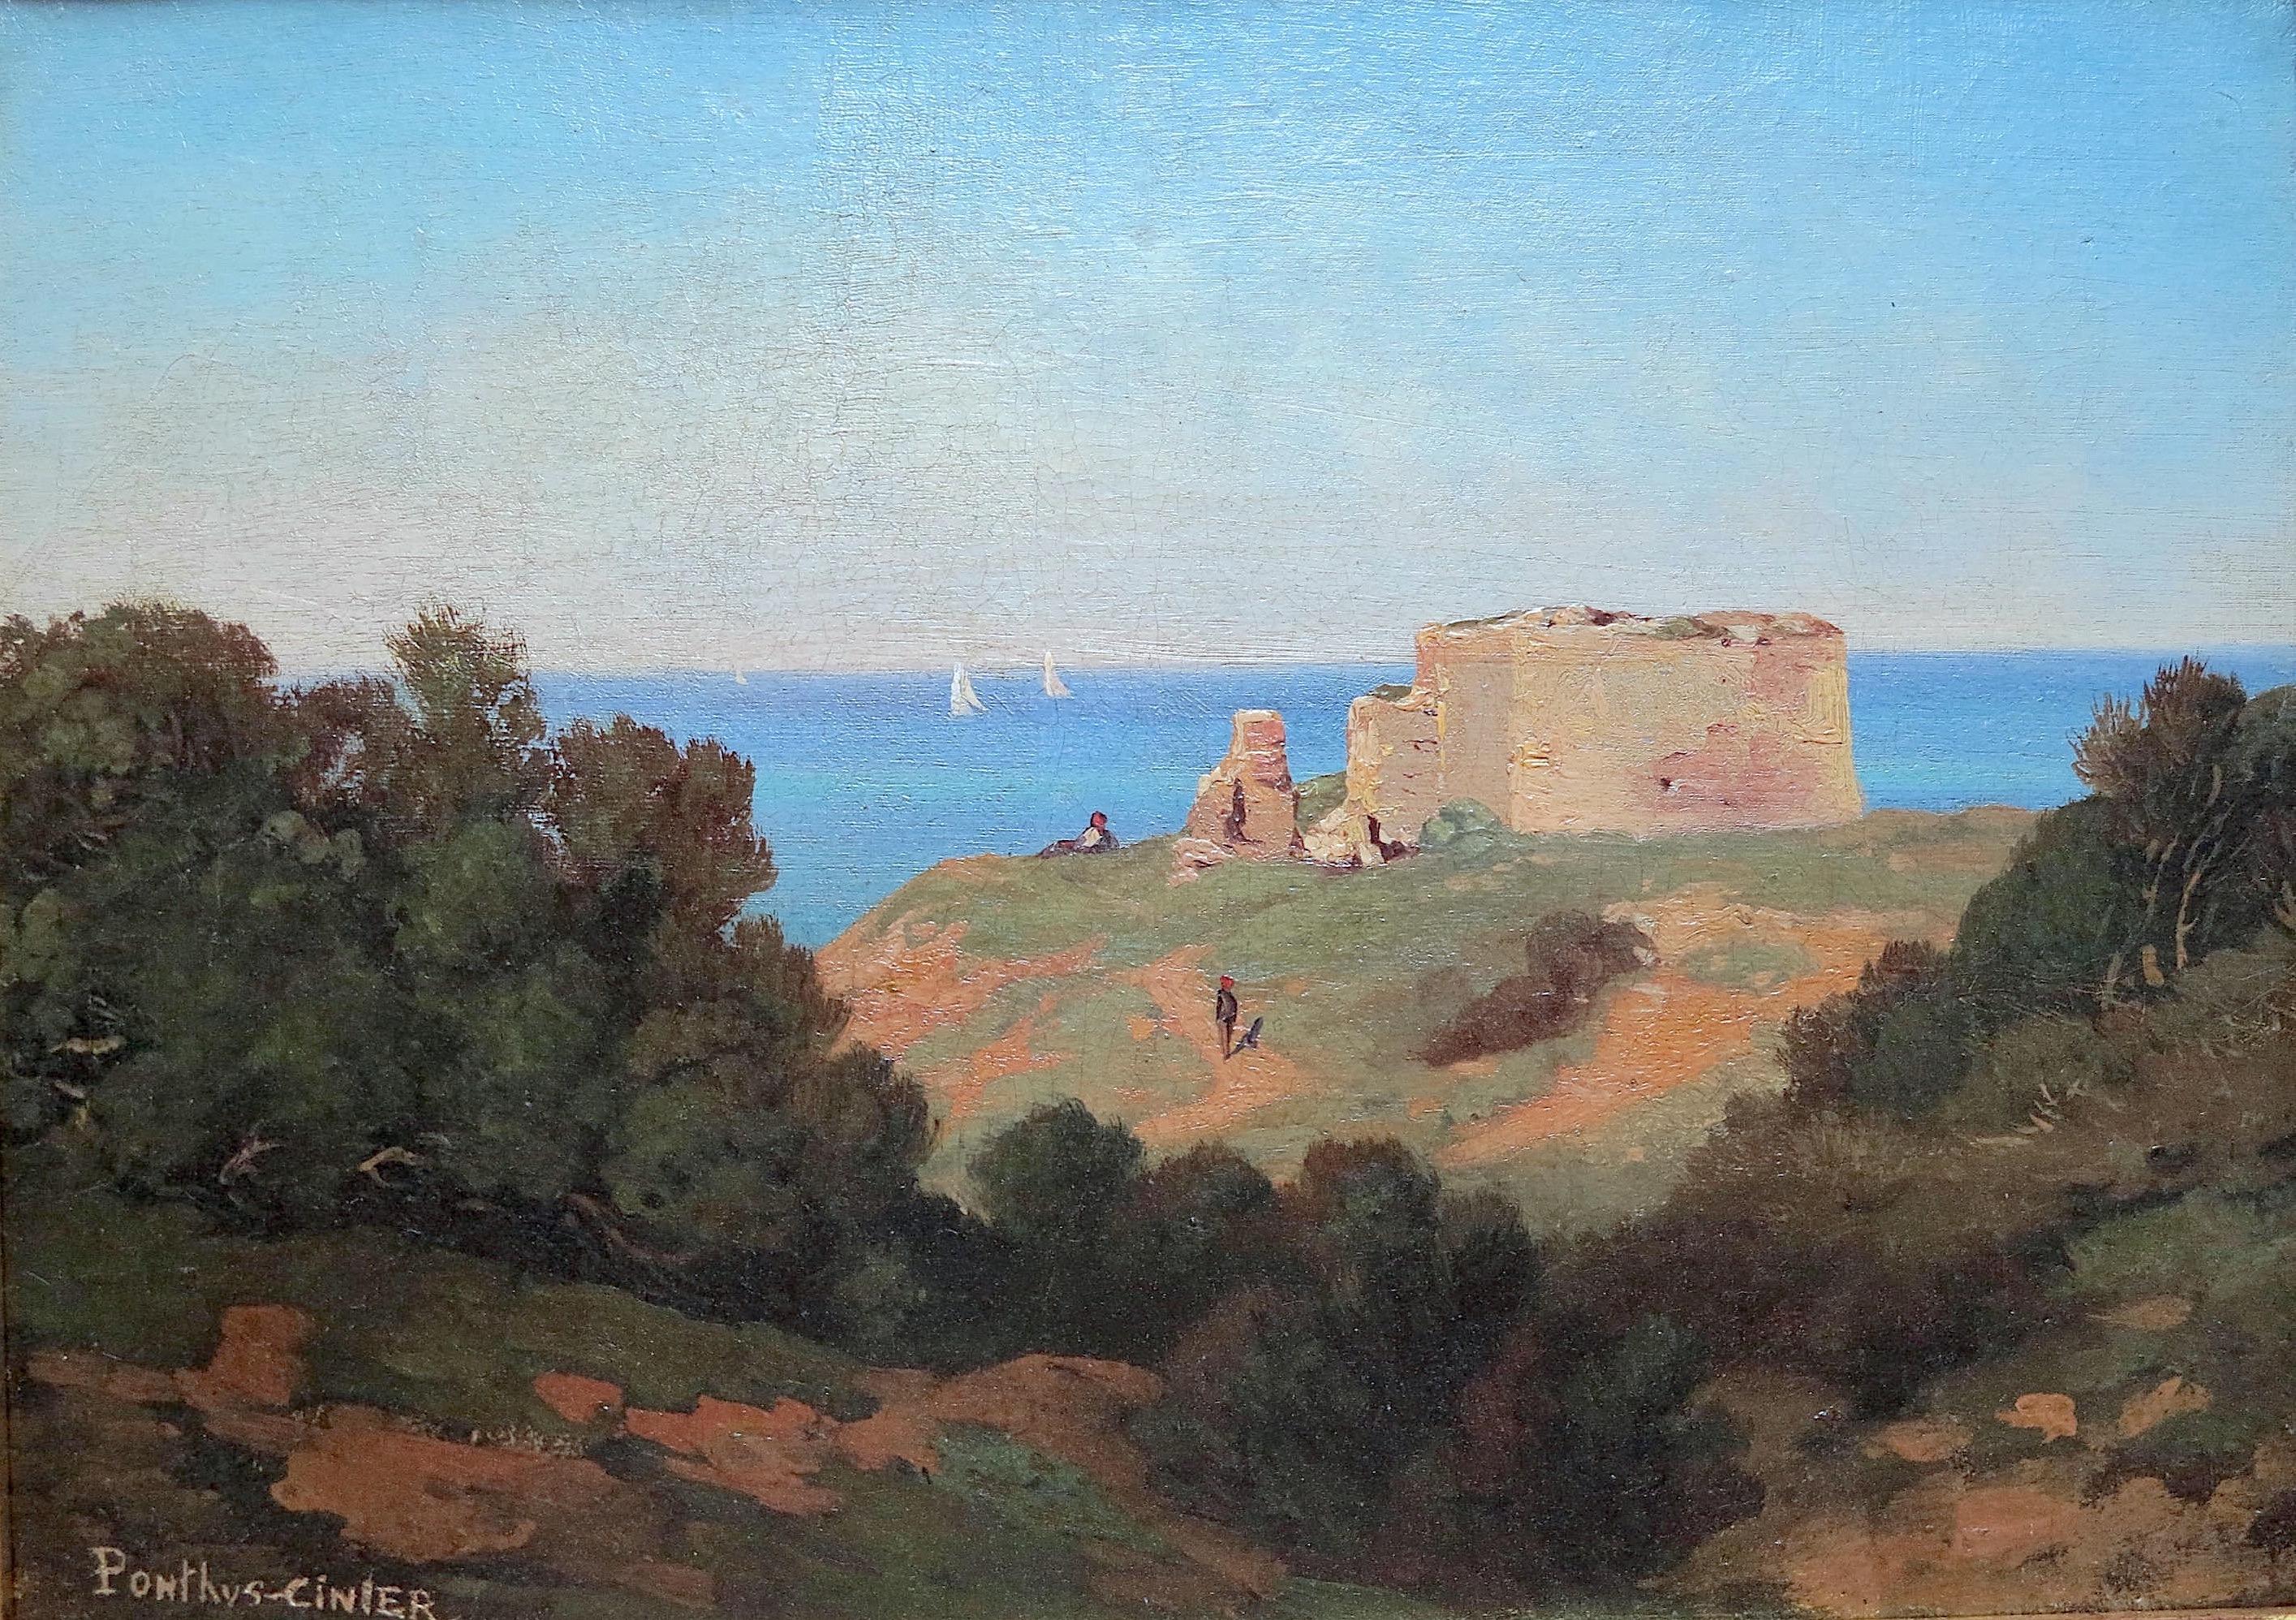 Ruined fort on the Italian coast - Painting by Antoine Ponthus-Cinier 